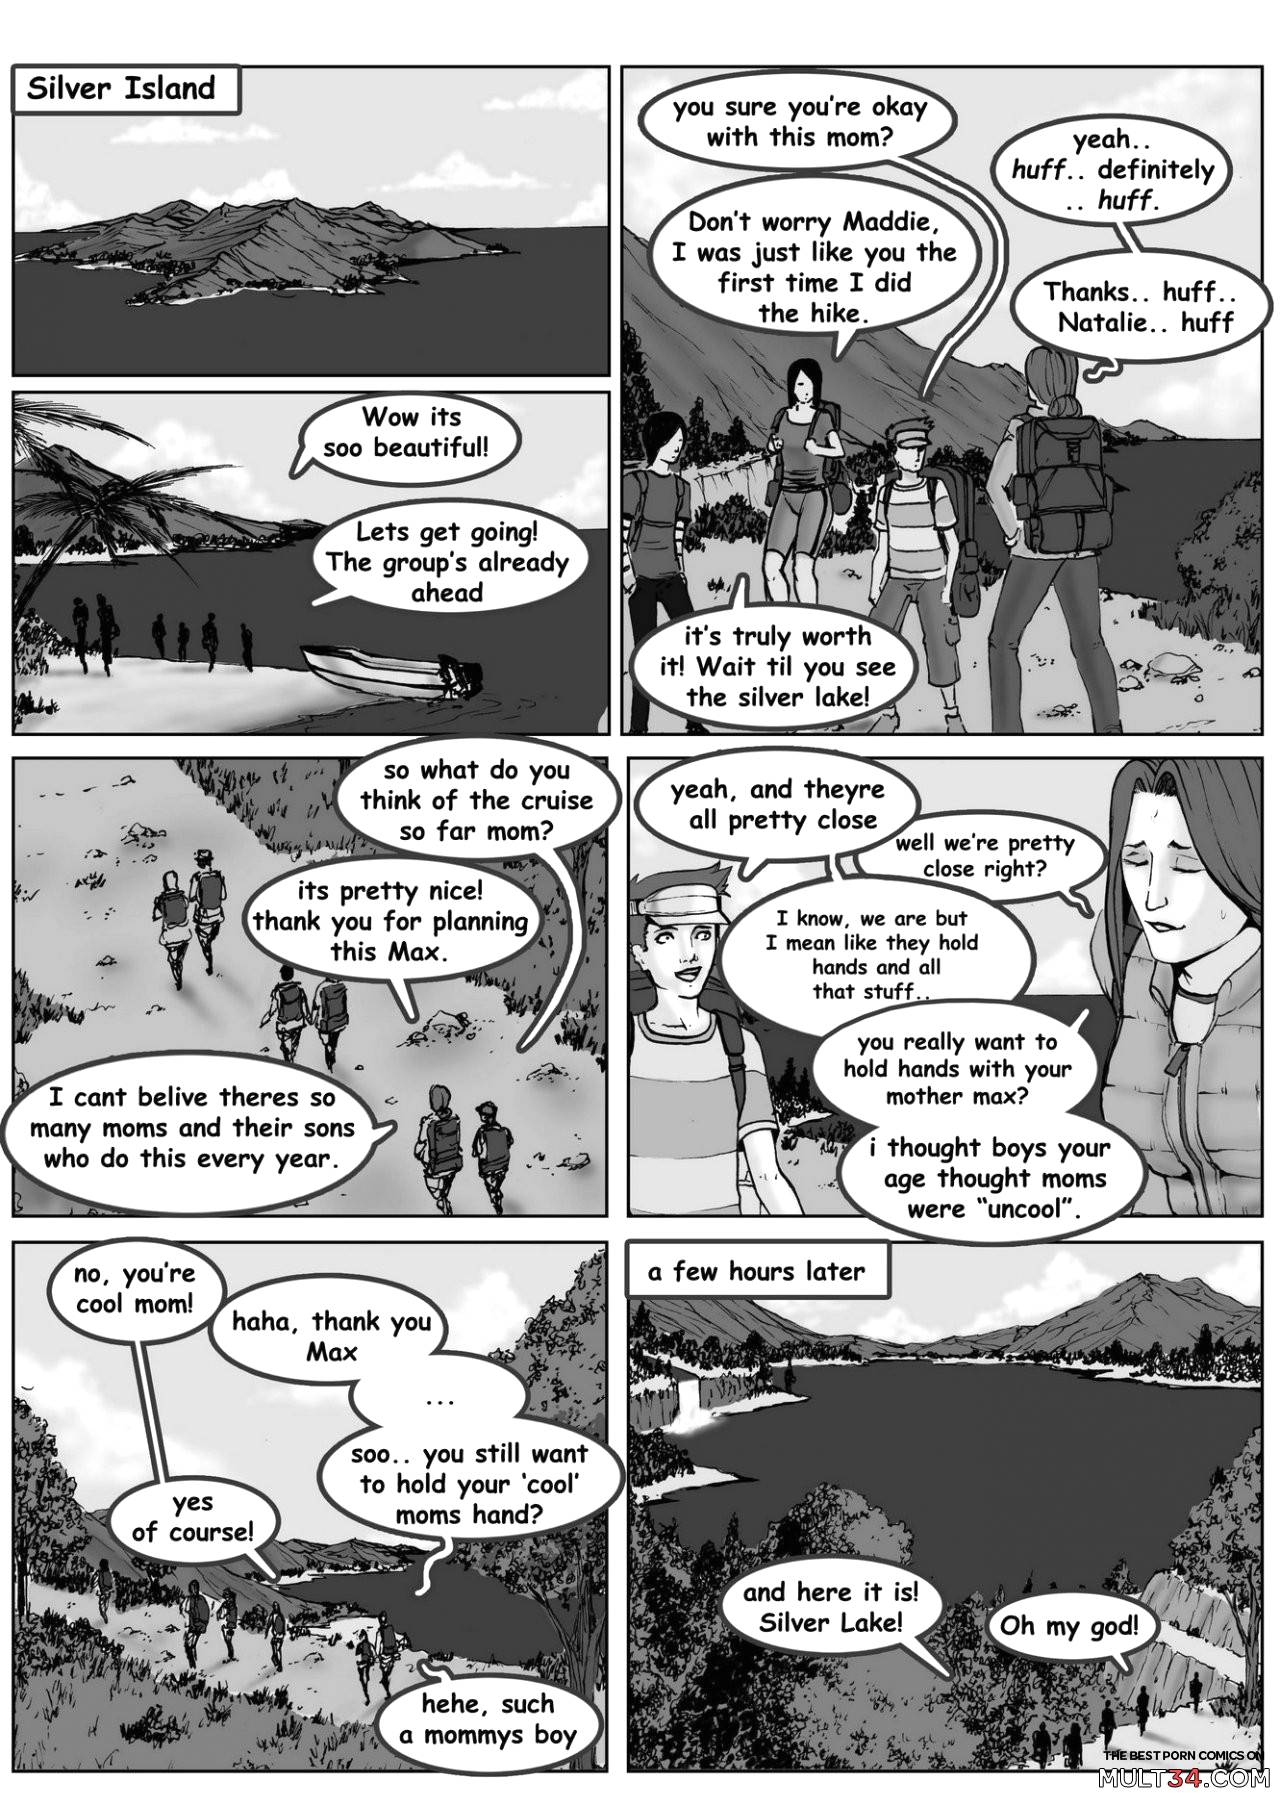 Max and Maddie's Island Quest: Part 1: Jocasta page 14